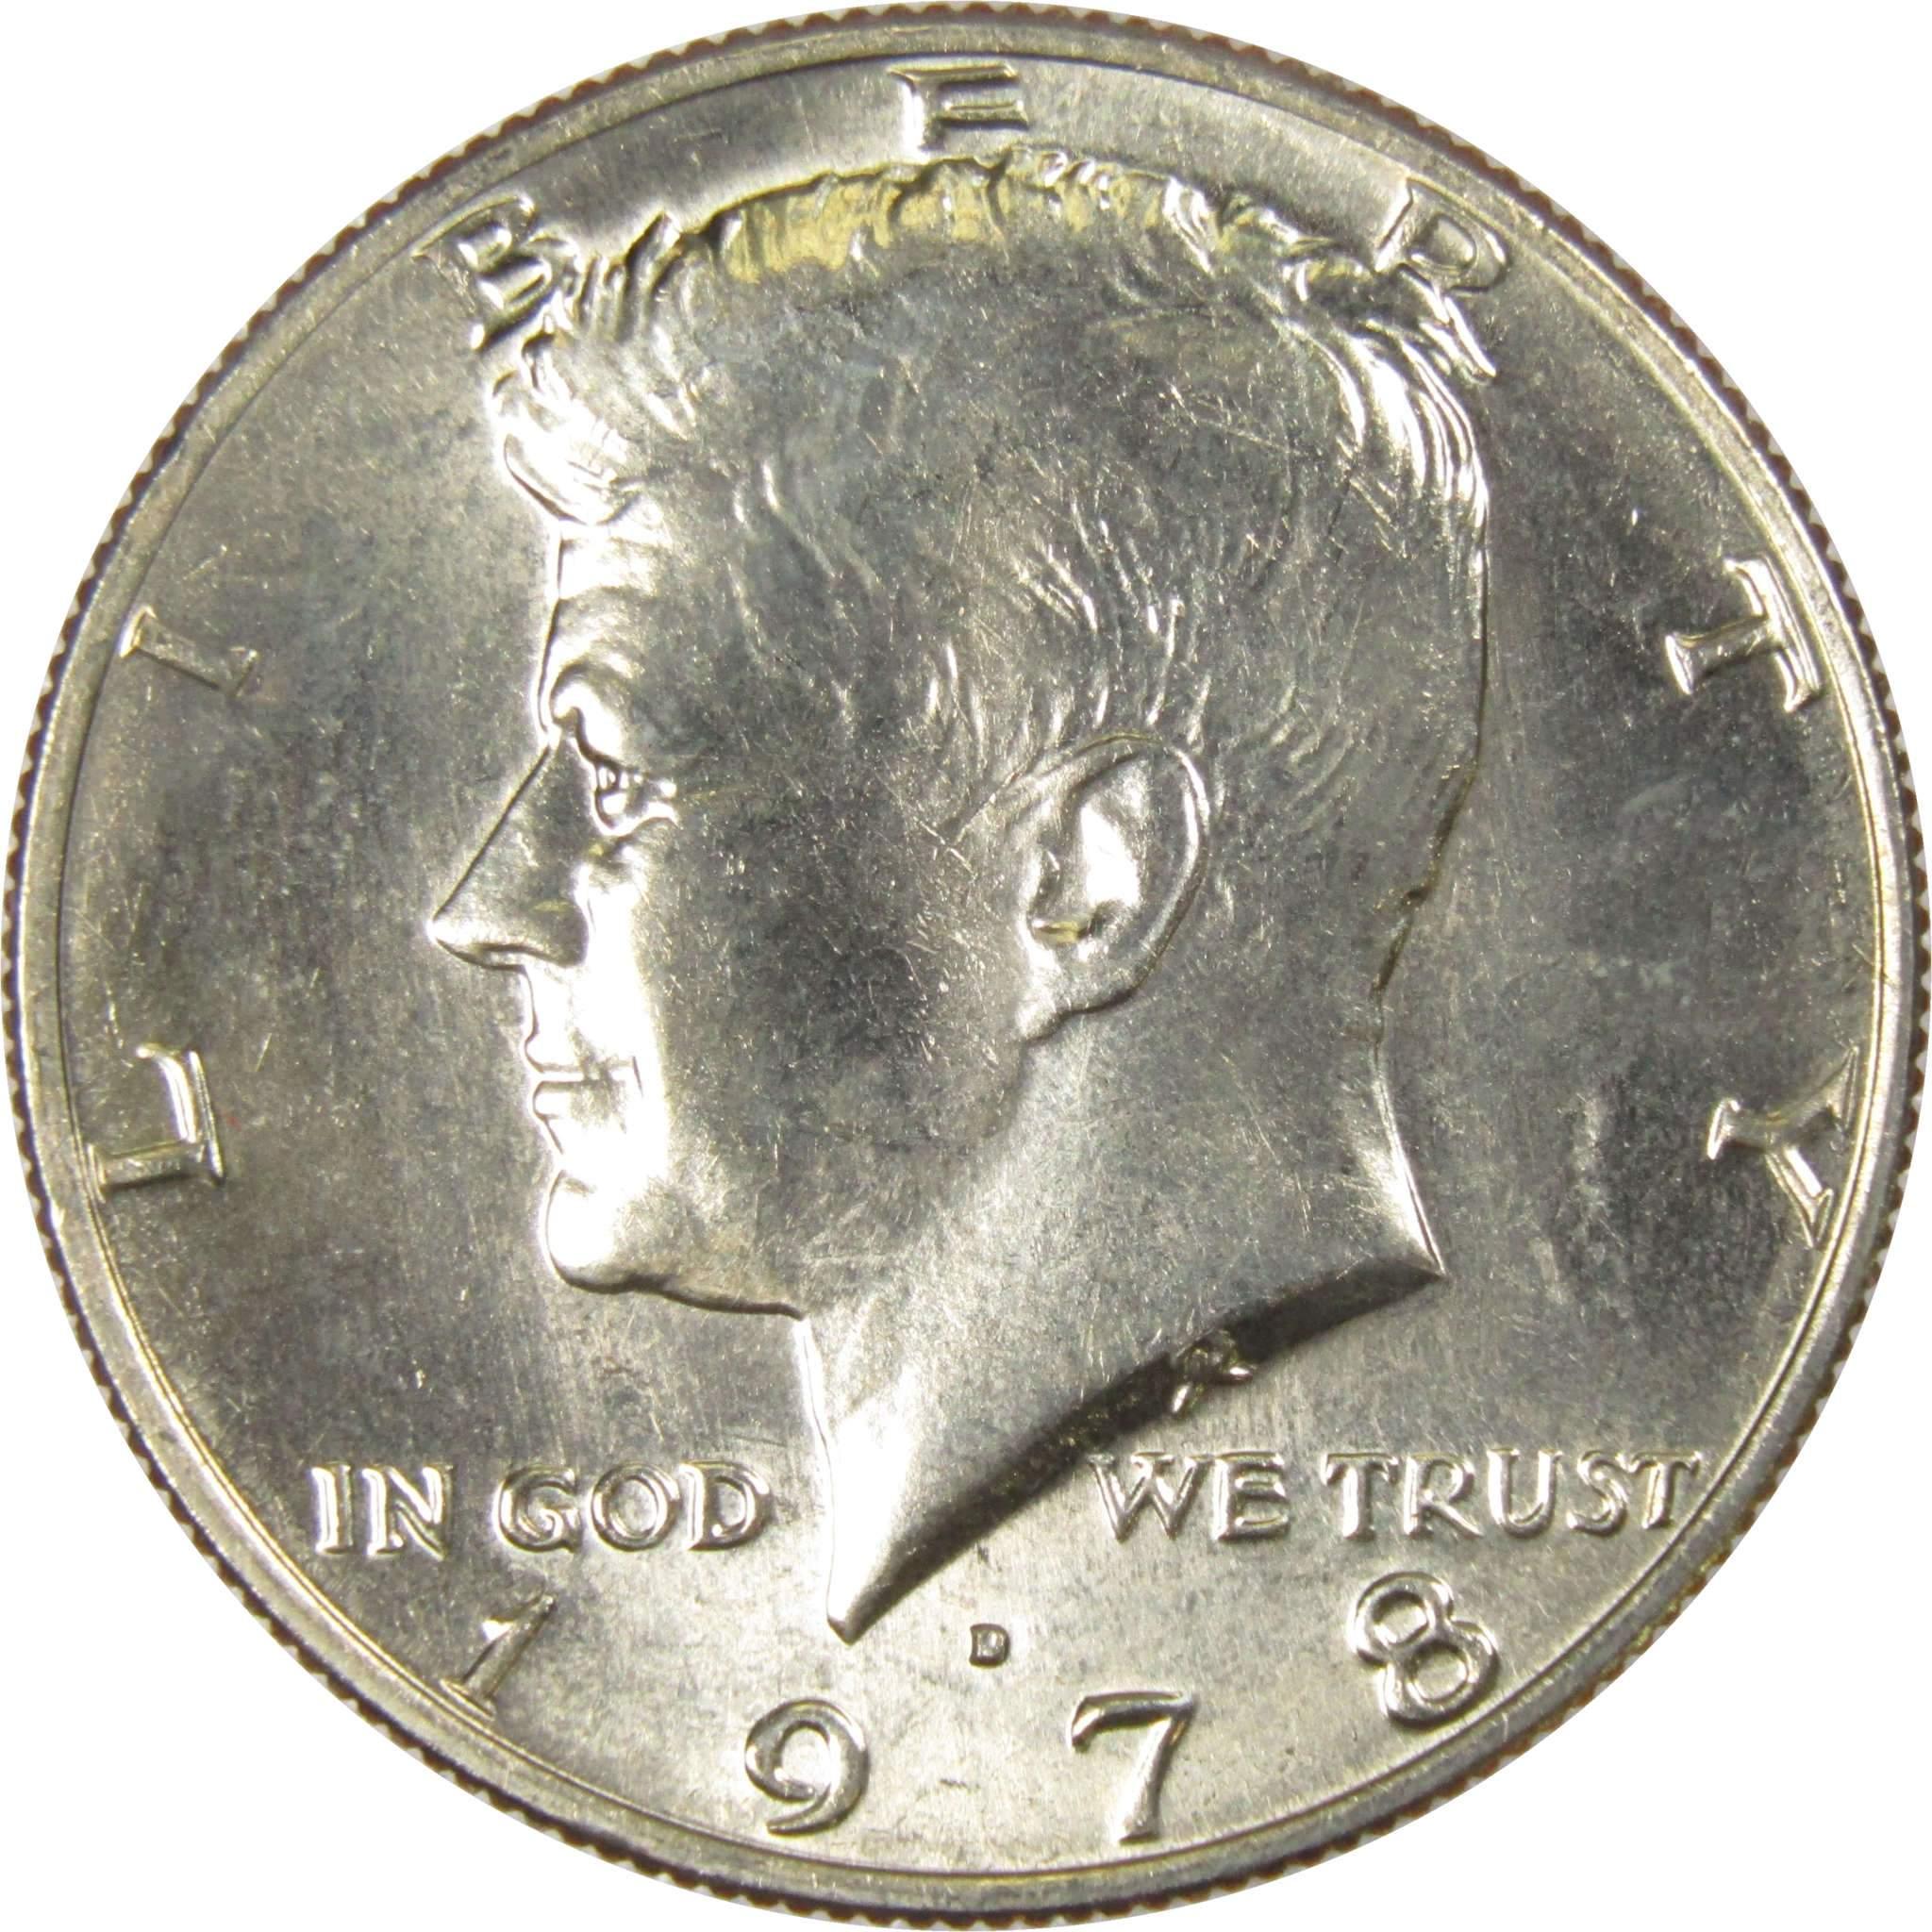 1978 D Kennedy Half Dollar BU Uncirculated Mint State 50c US Coin Collectible